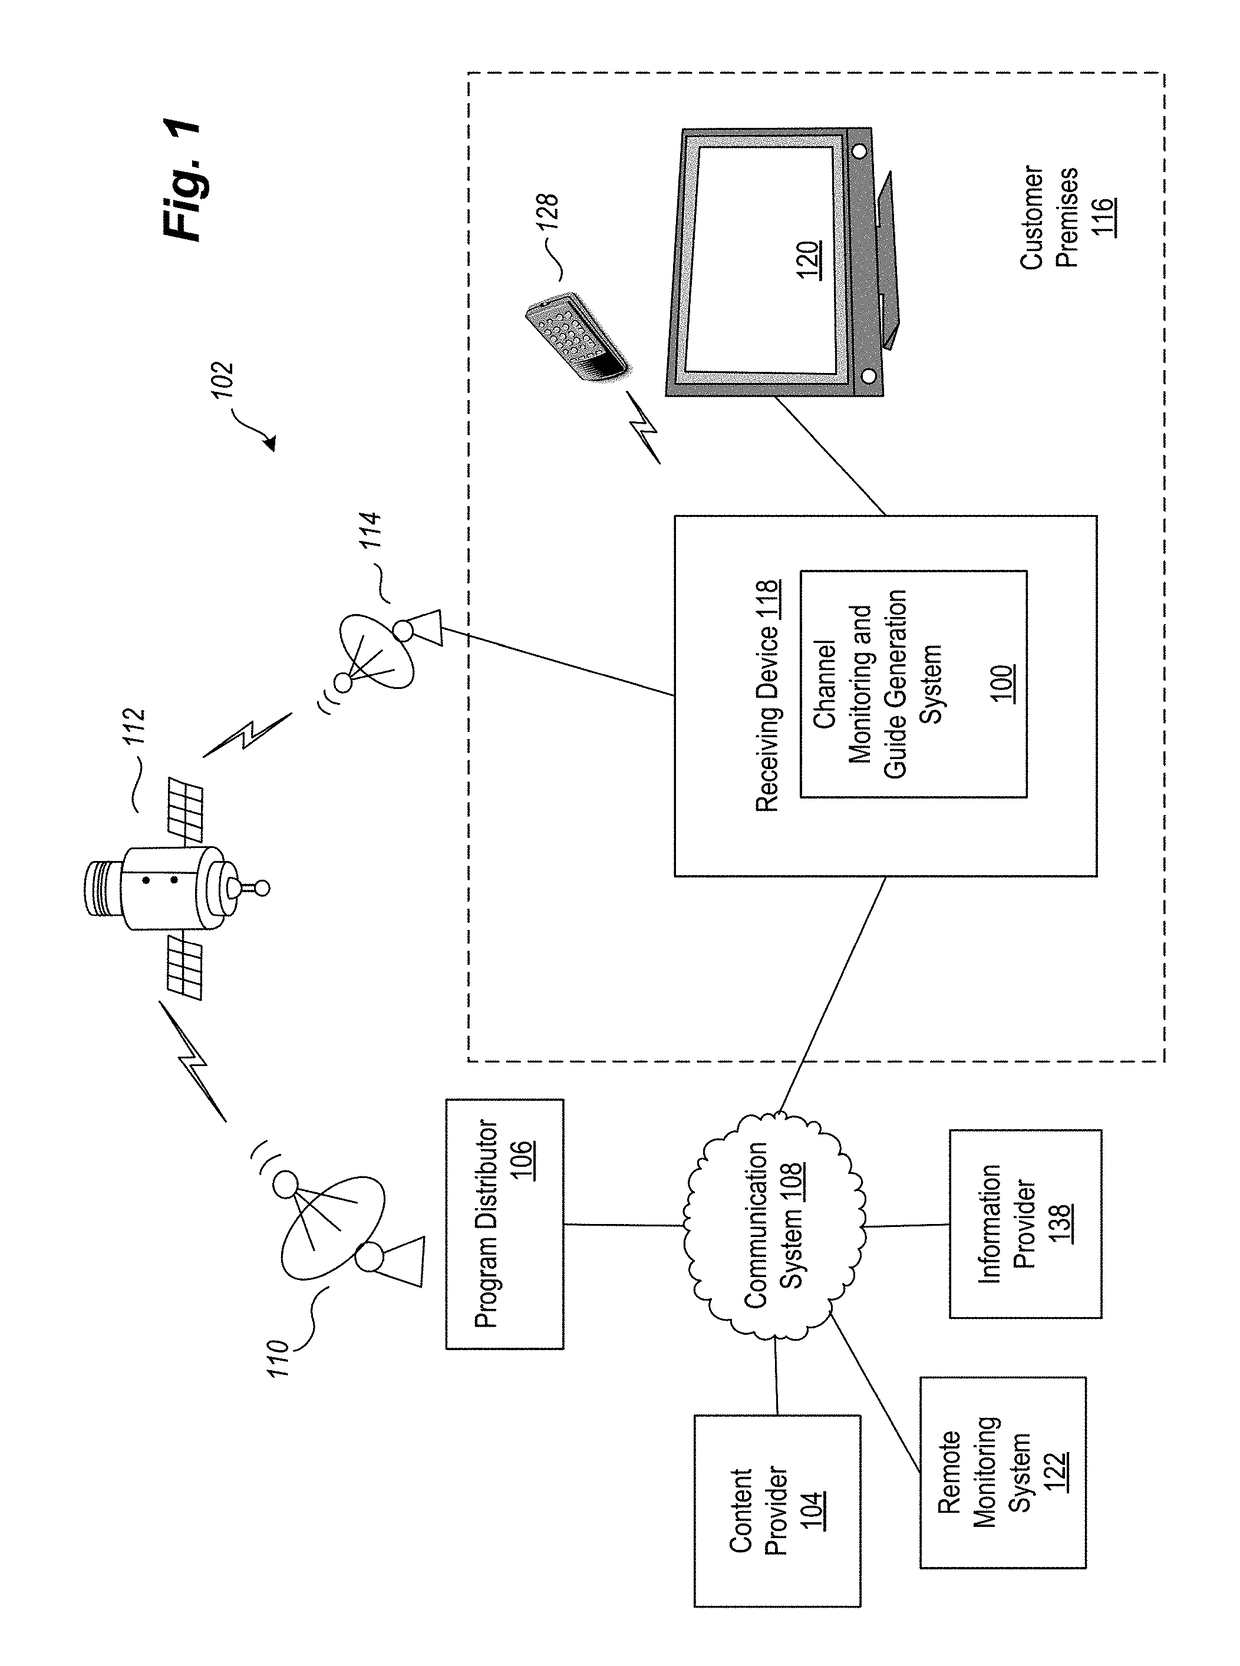 Systems and methods for an adaptive electronic program guide